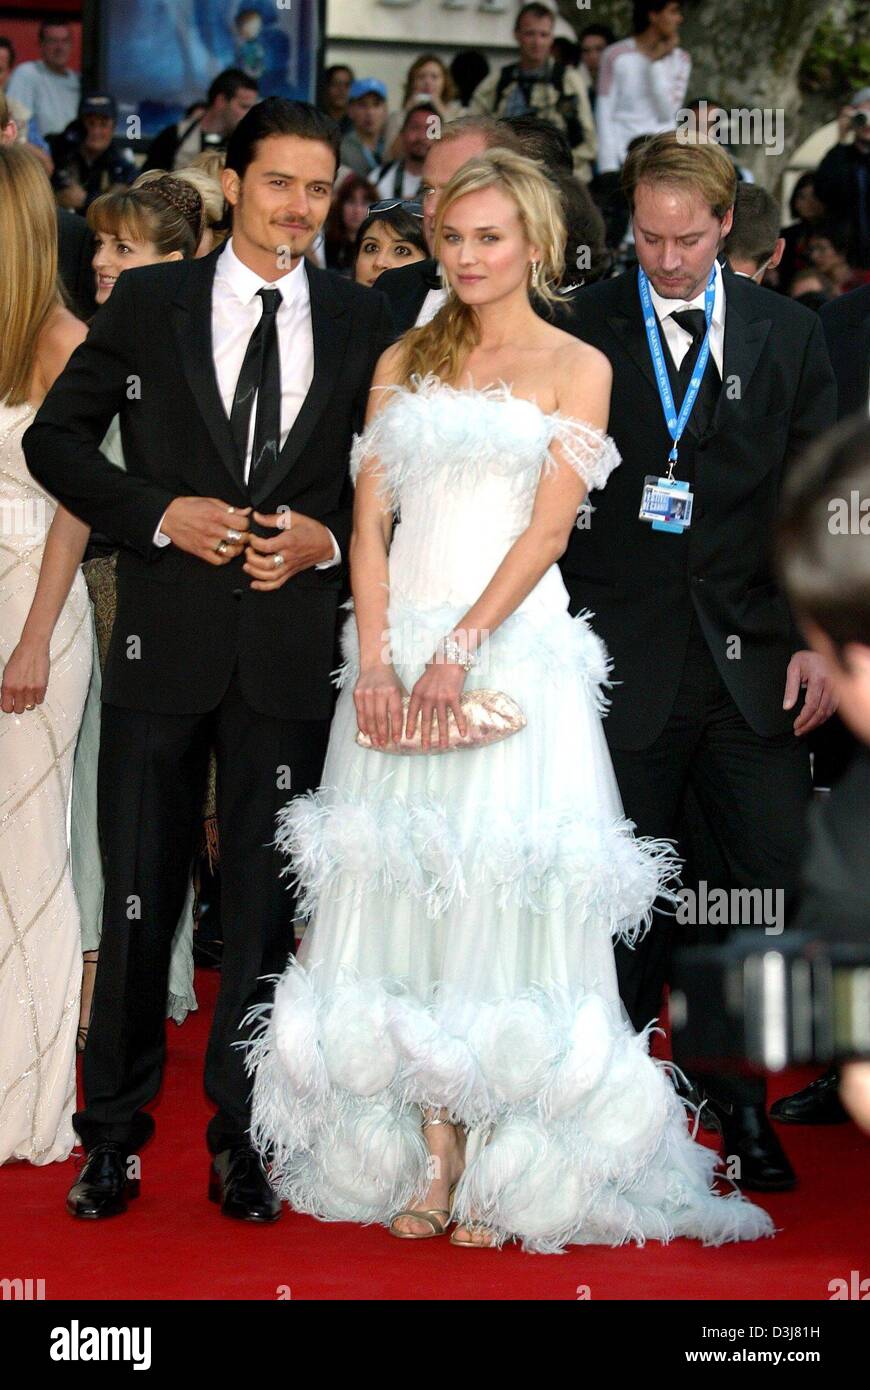 (dpa) - German actress Diane Kruger and her British colleague Orlando Bloom arrive for the presentation of their new movie 'Troy' at the 57th Film Festival in Cannes, France, 13 May 2004. In the movie Kruger stars as the beautiful Helena, Bloom plays Paris. Stock Photo